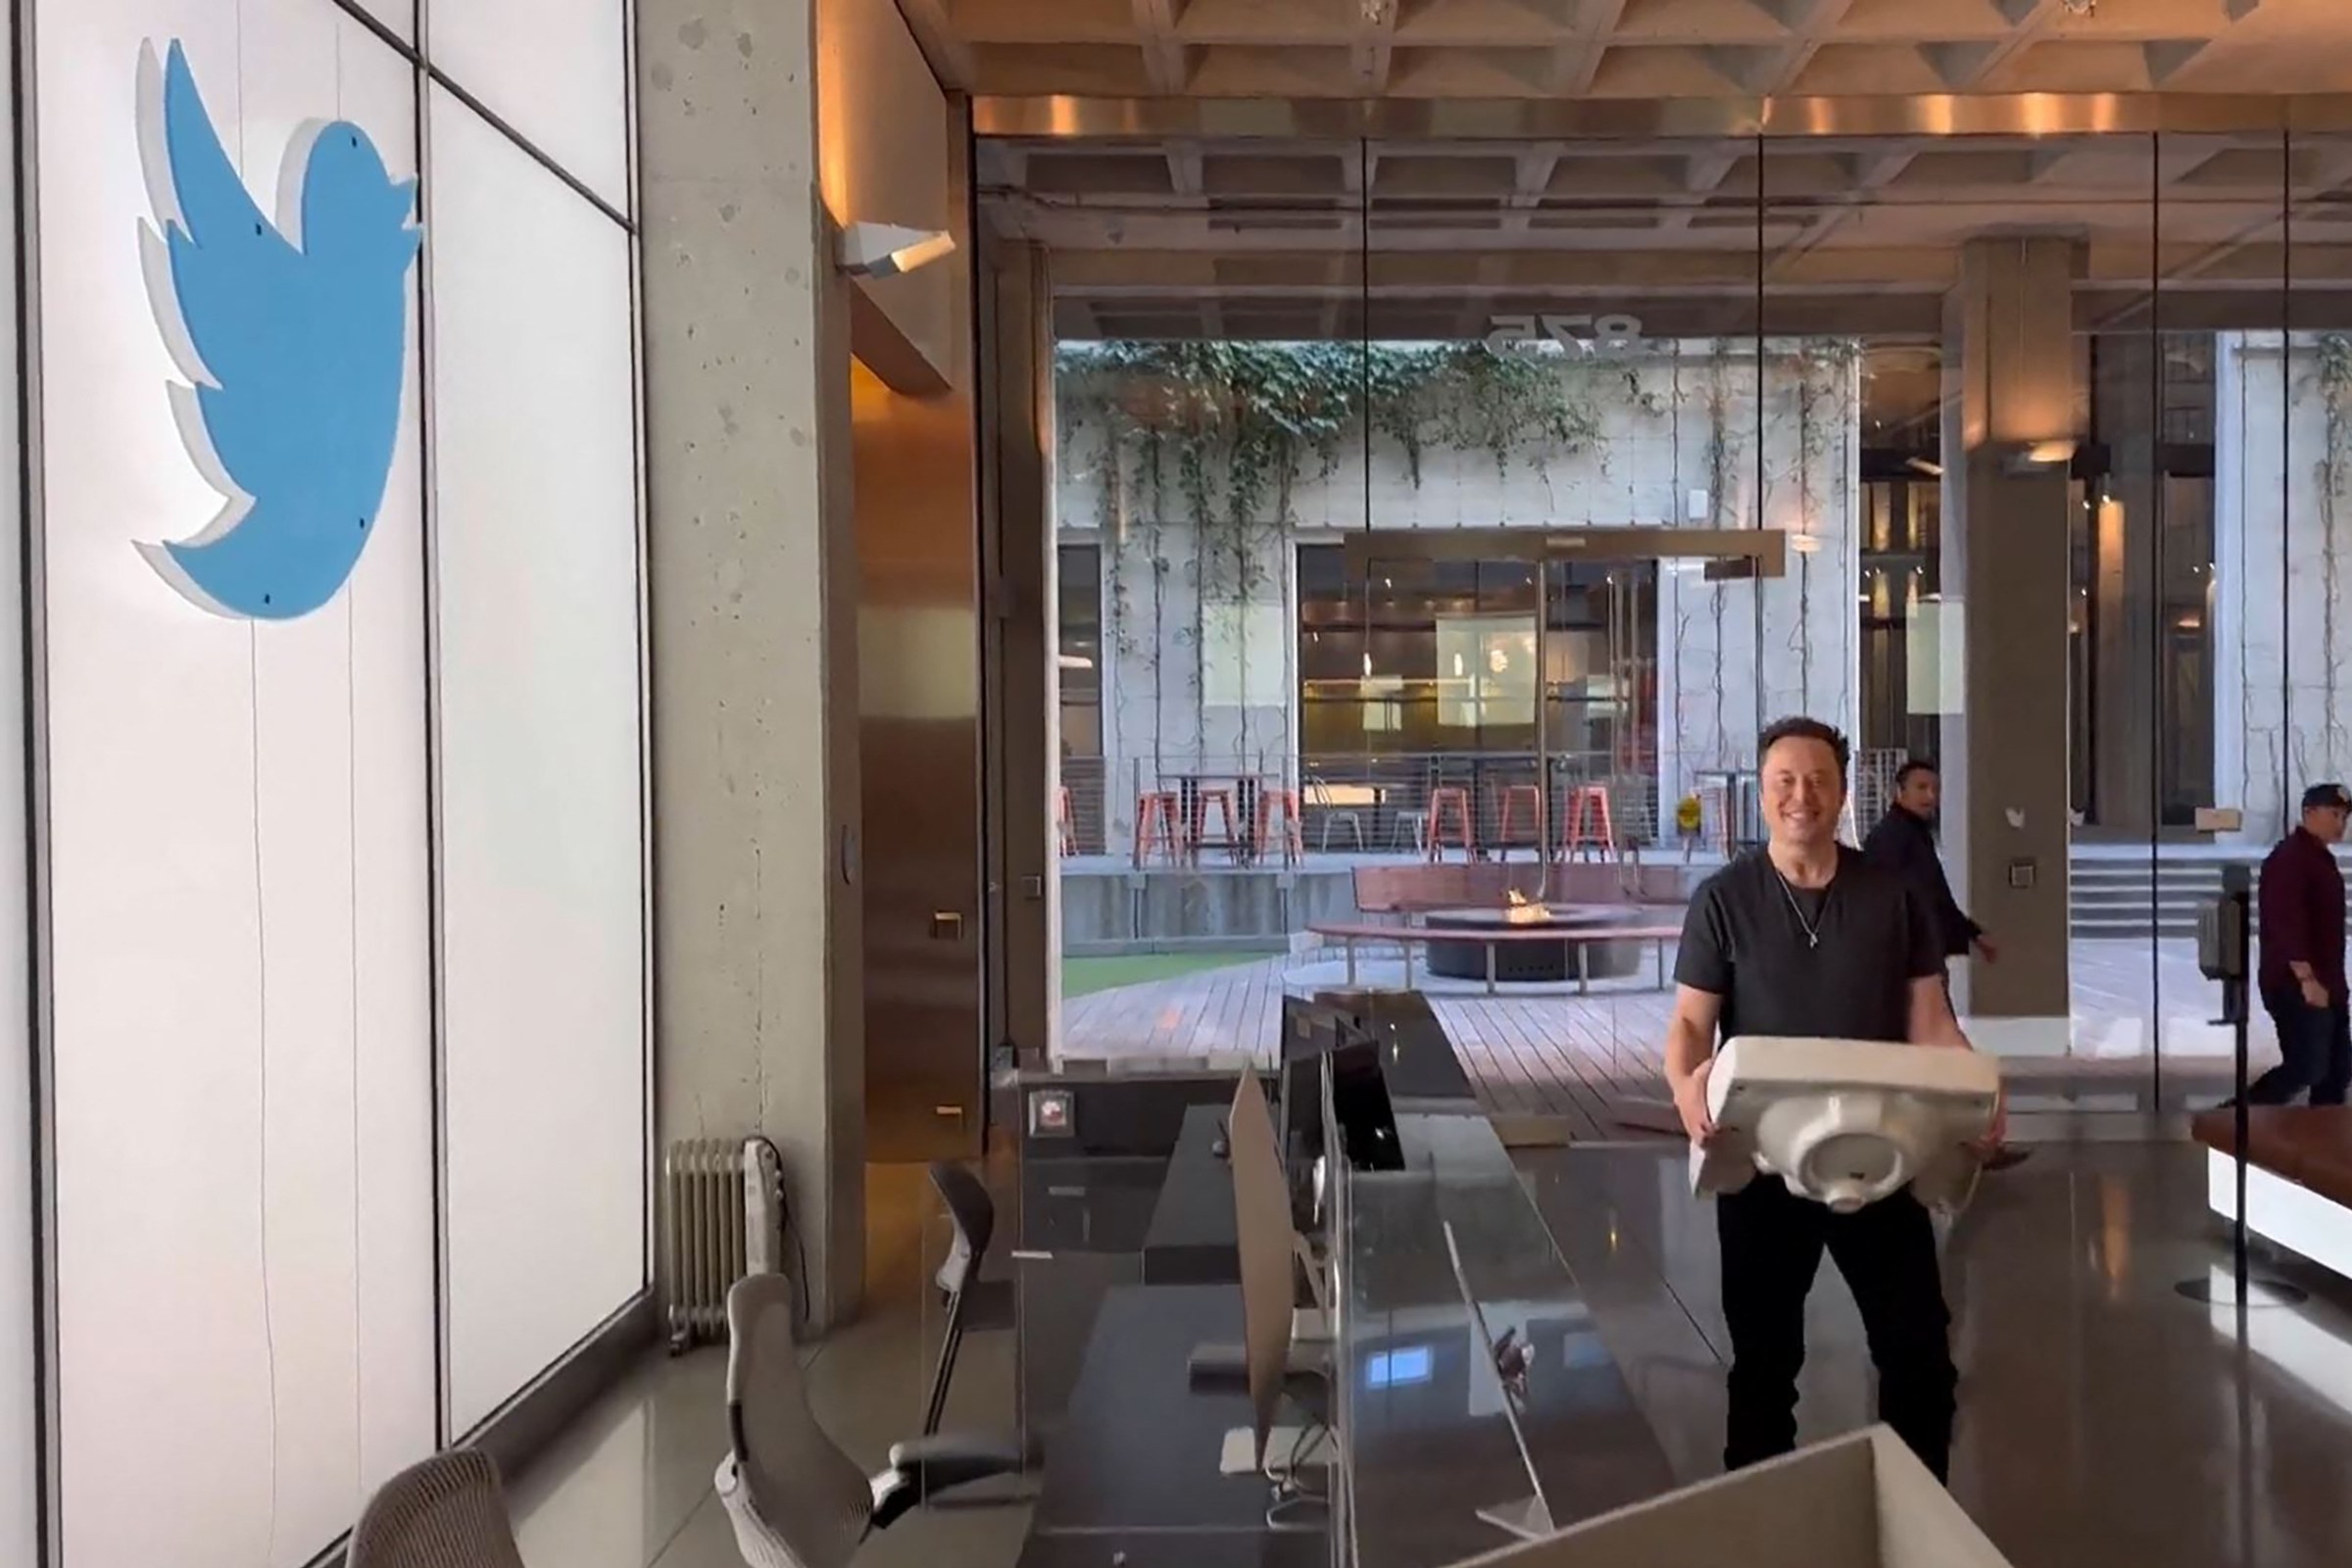 Twitter CEO Elon Musk carries a sink into Twitter headquarters as part of a typically epic jape.